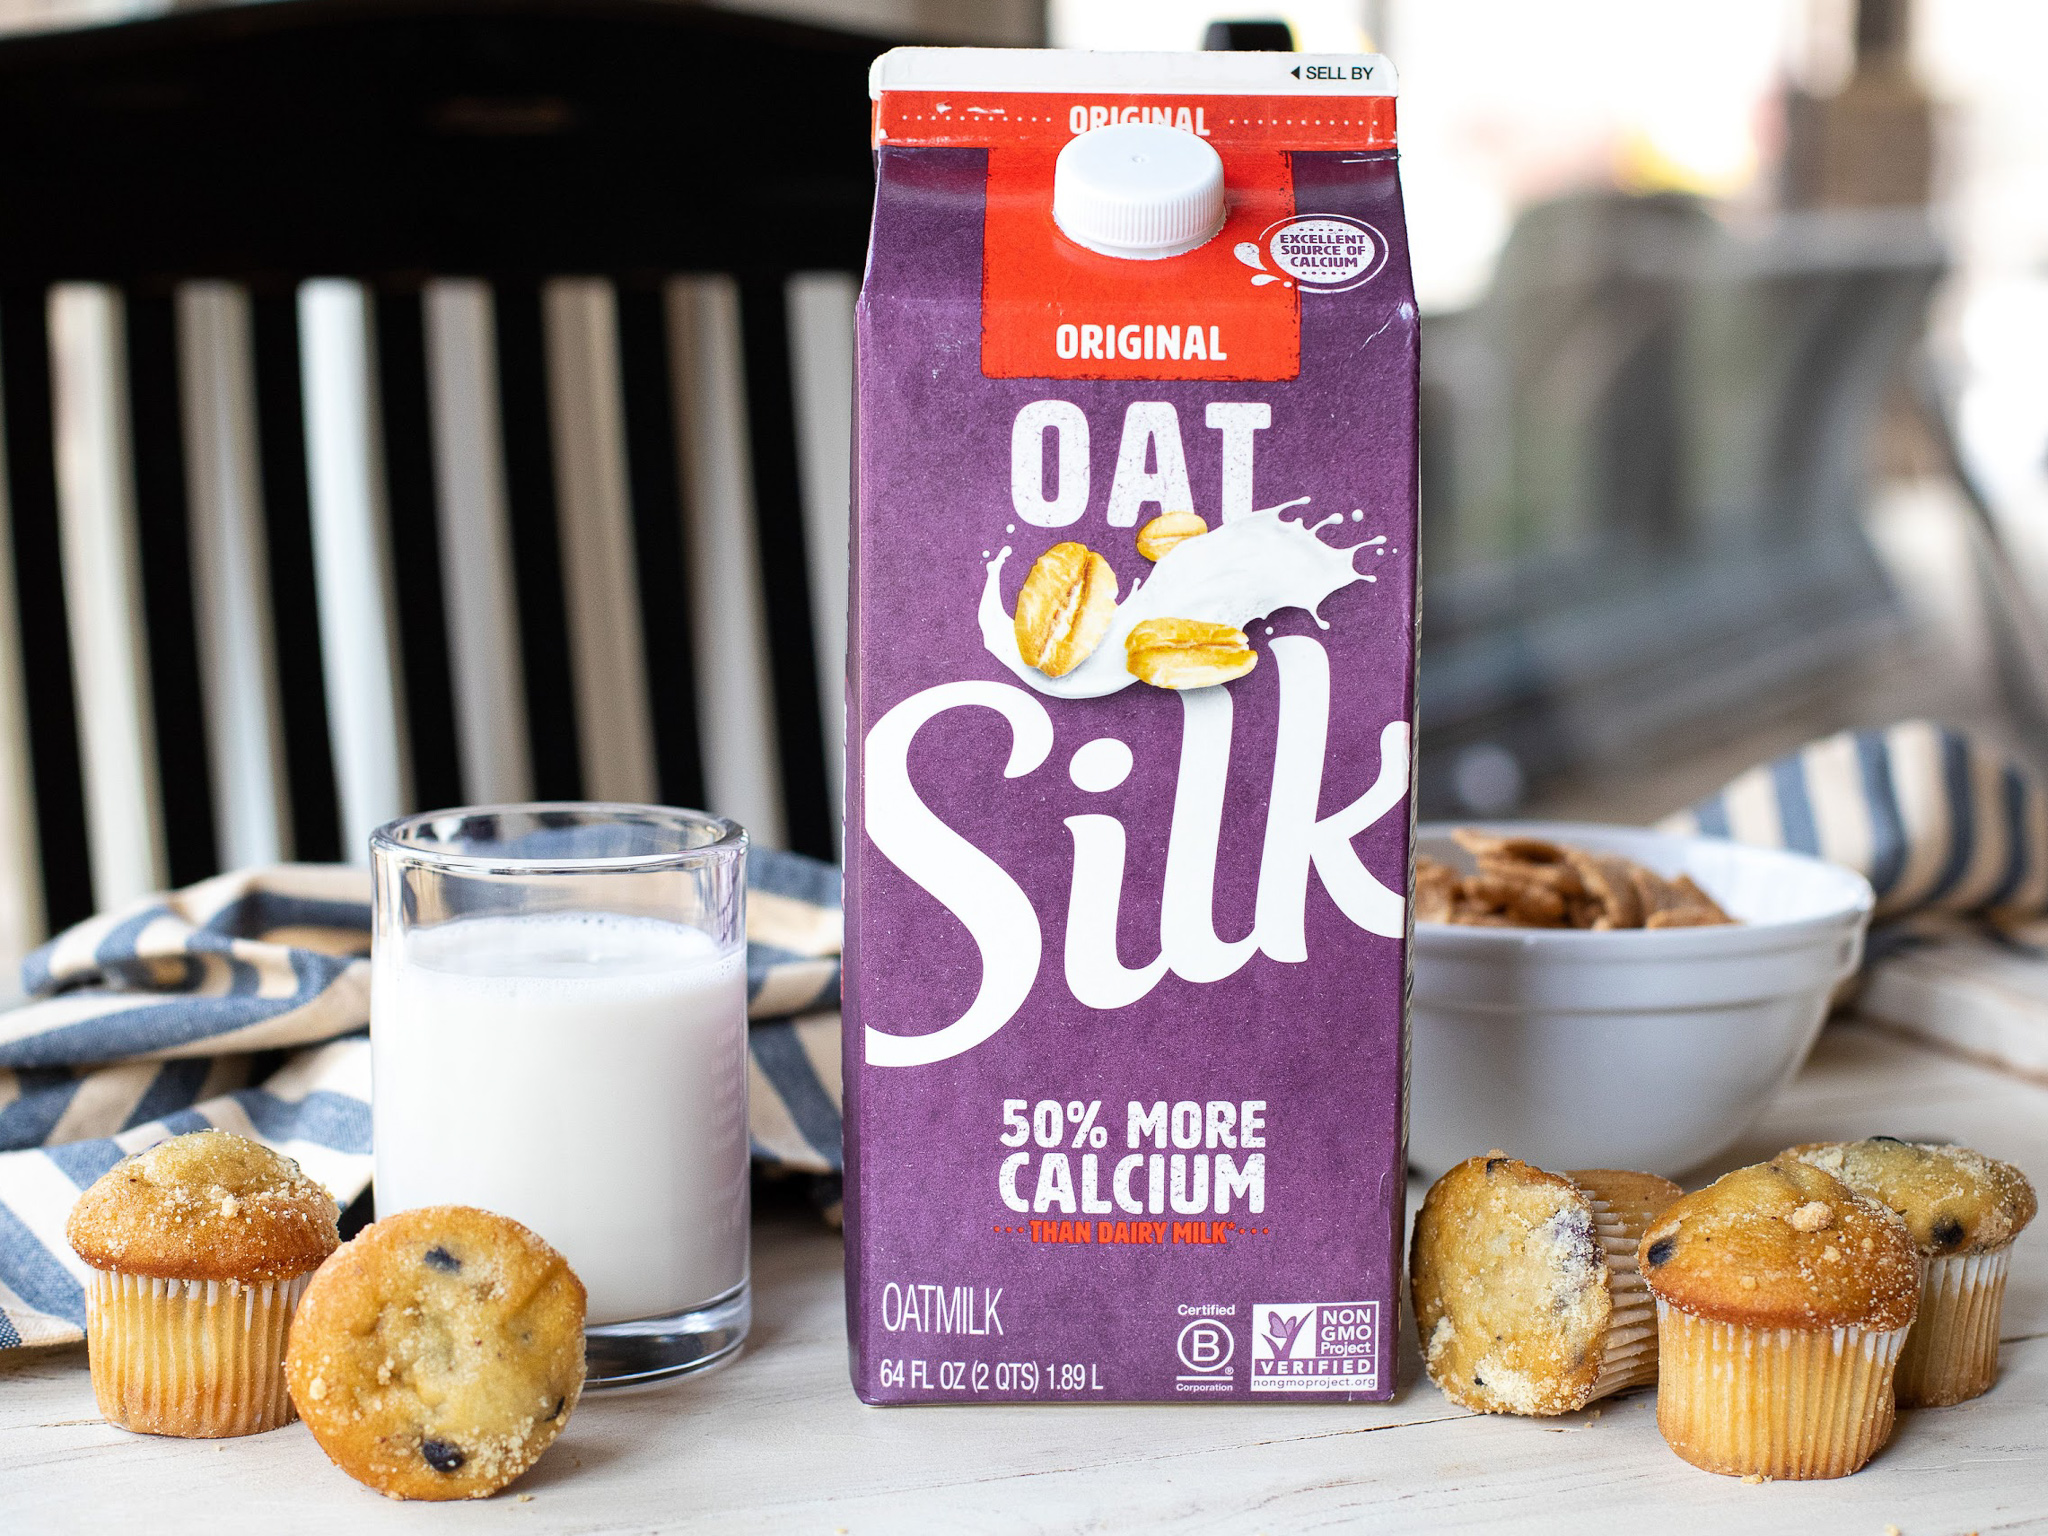 Grab Silk Oatmilk For As Low As 99¢ At Kroger